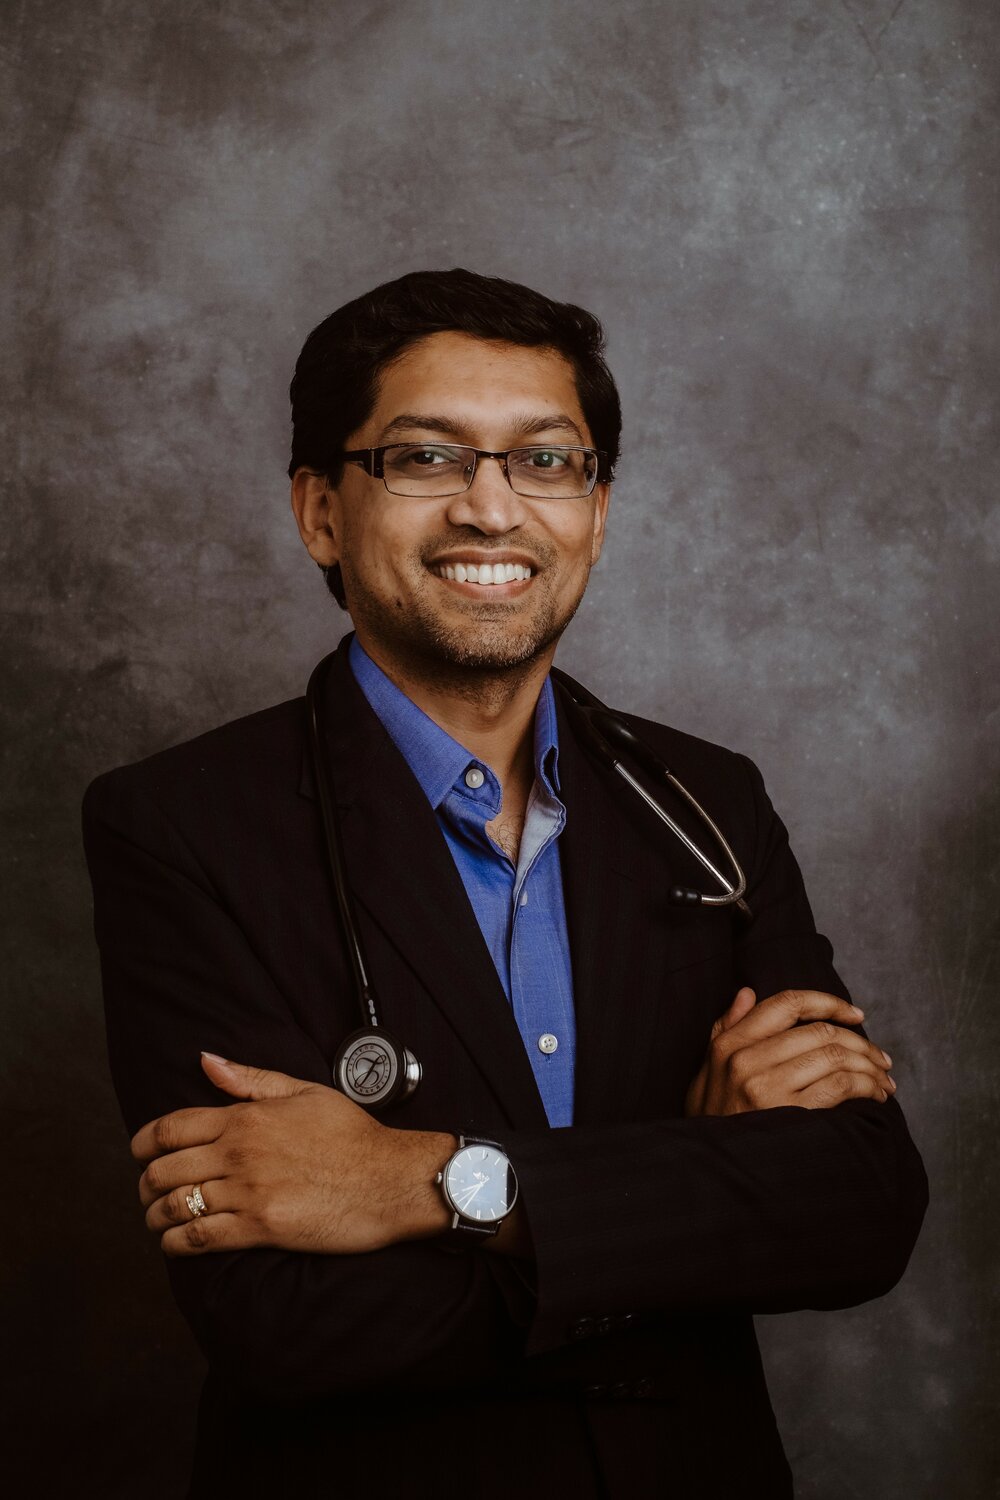 Dr. Ameeth Vedre is a non-invasive cardiologist and cardiac imaging specialist.